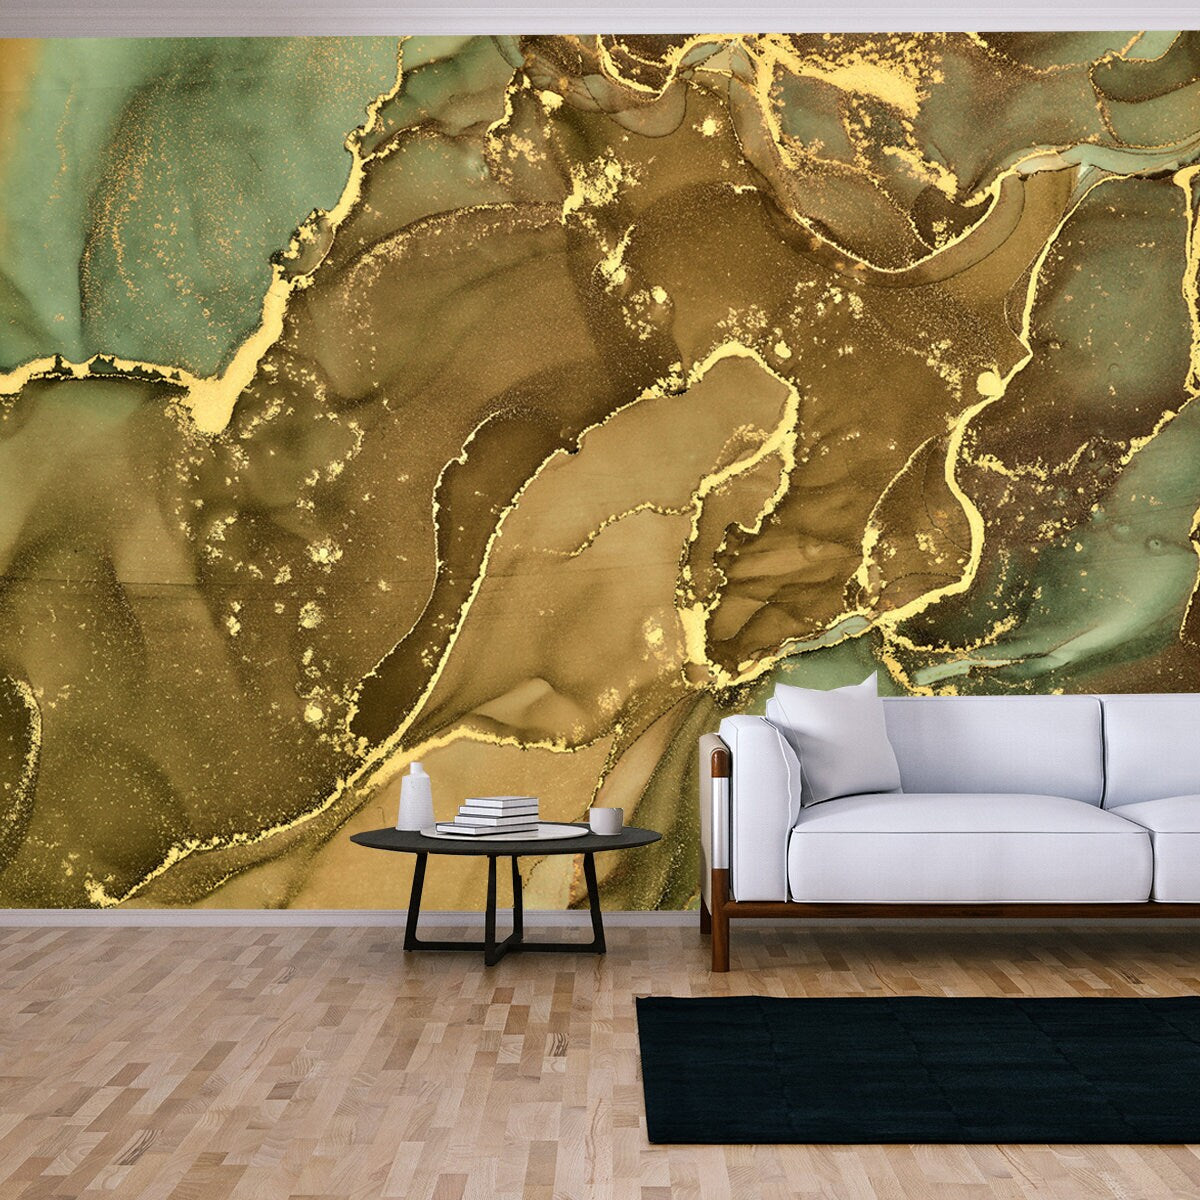 Currents of Translucent Hues, Snaking Metallic Swirls, and Foamy Sprays of Color Wallpaper Living Room Mural